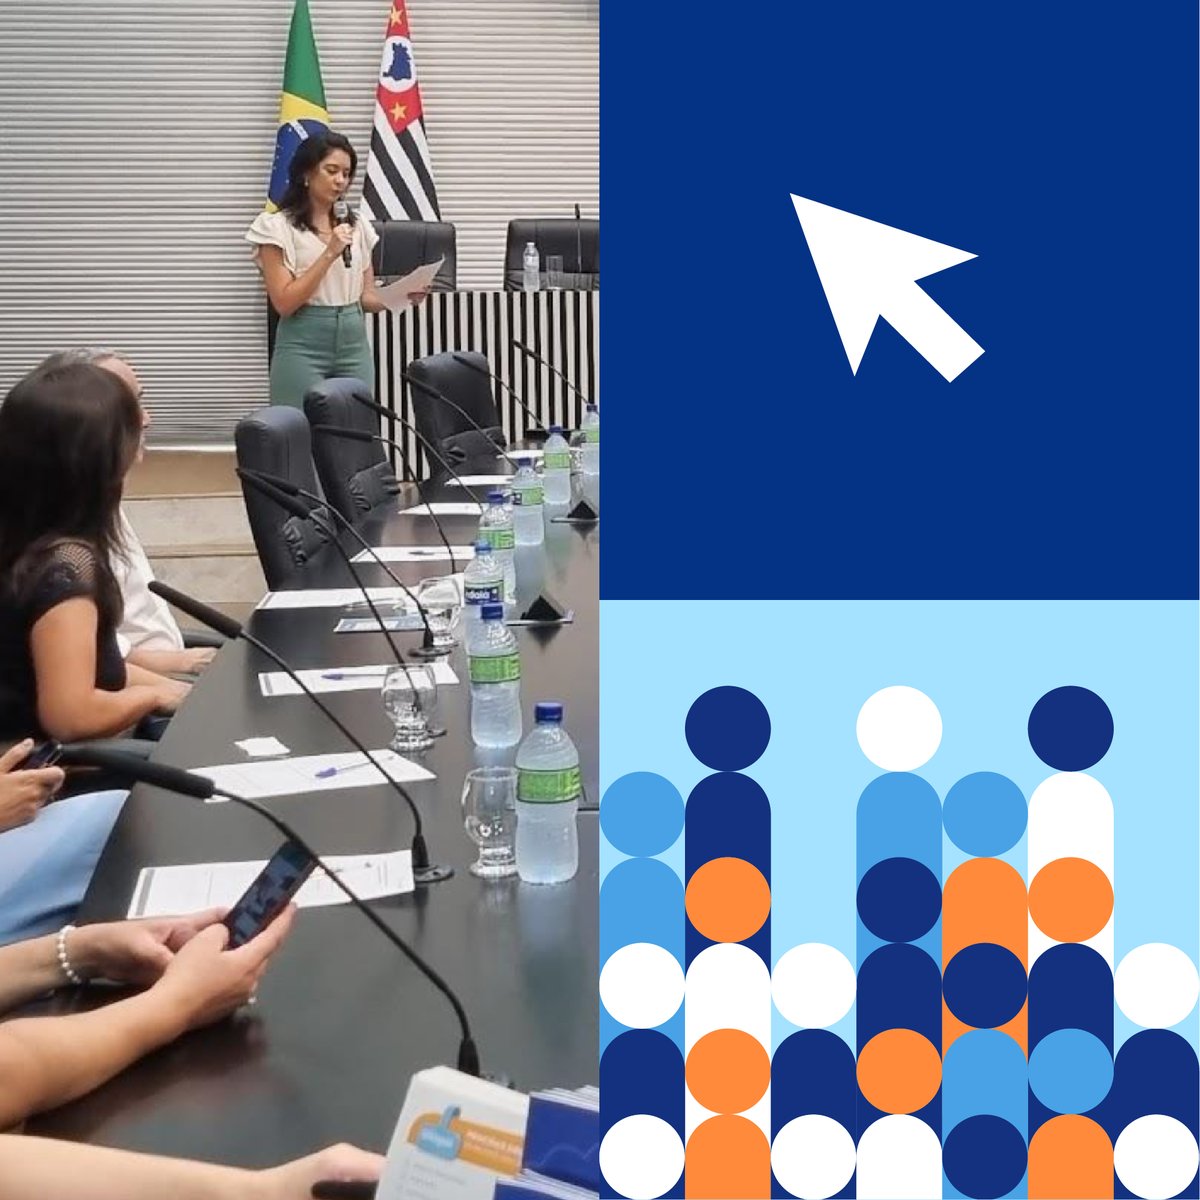 New on the blog, learn how @Oncoguia used their Health Equity Grant to address colorectal cancer care inequities in Brazil. gcca.info/_Blog_Post_4_3… #colorectalcancer #crchealthequitygrants #patientadvocacy #healthequity